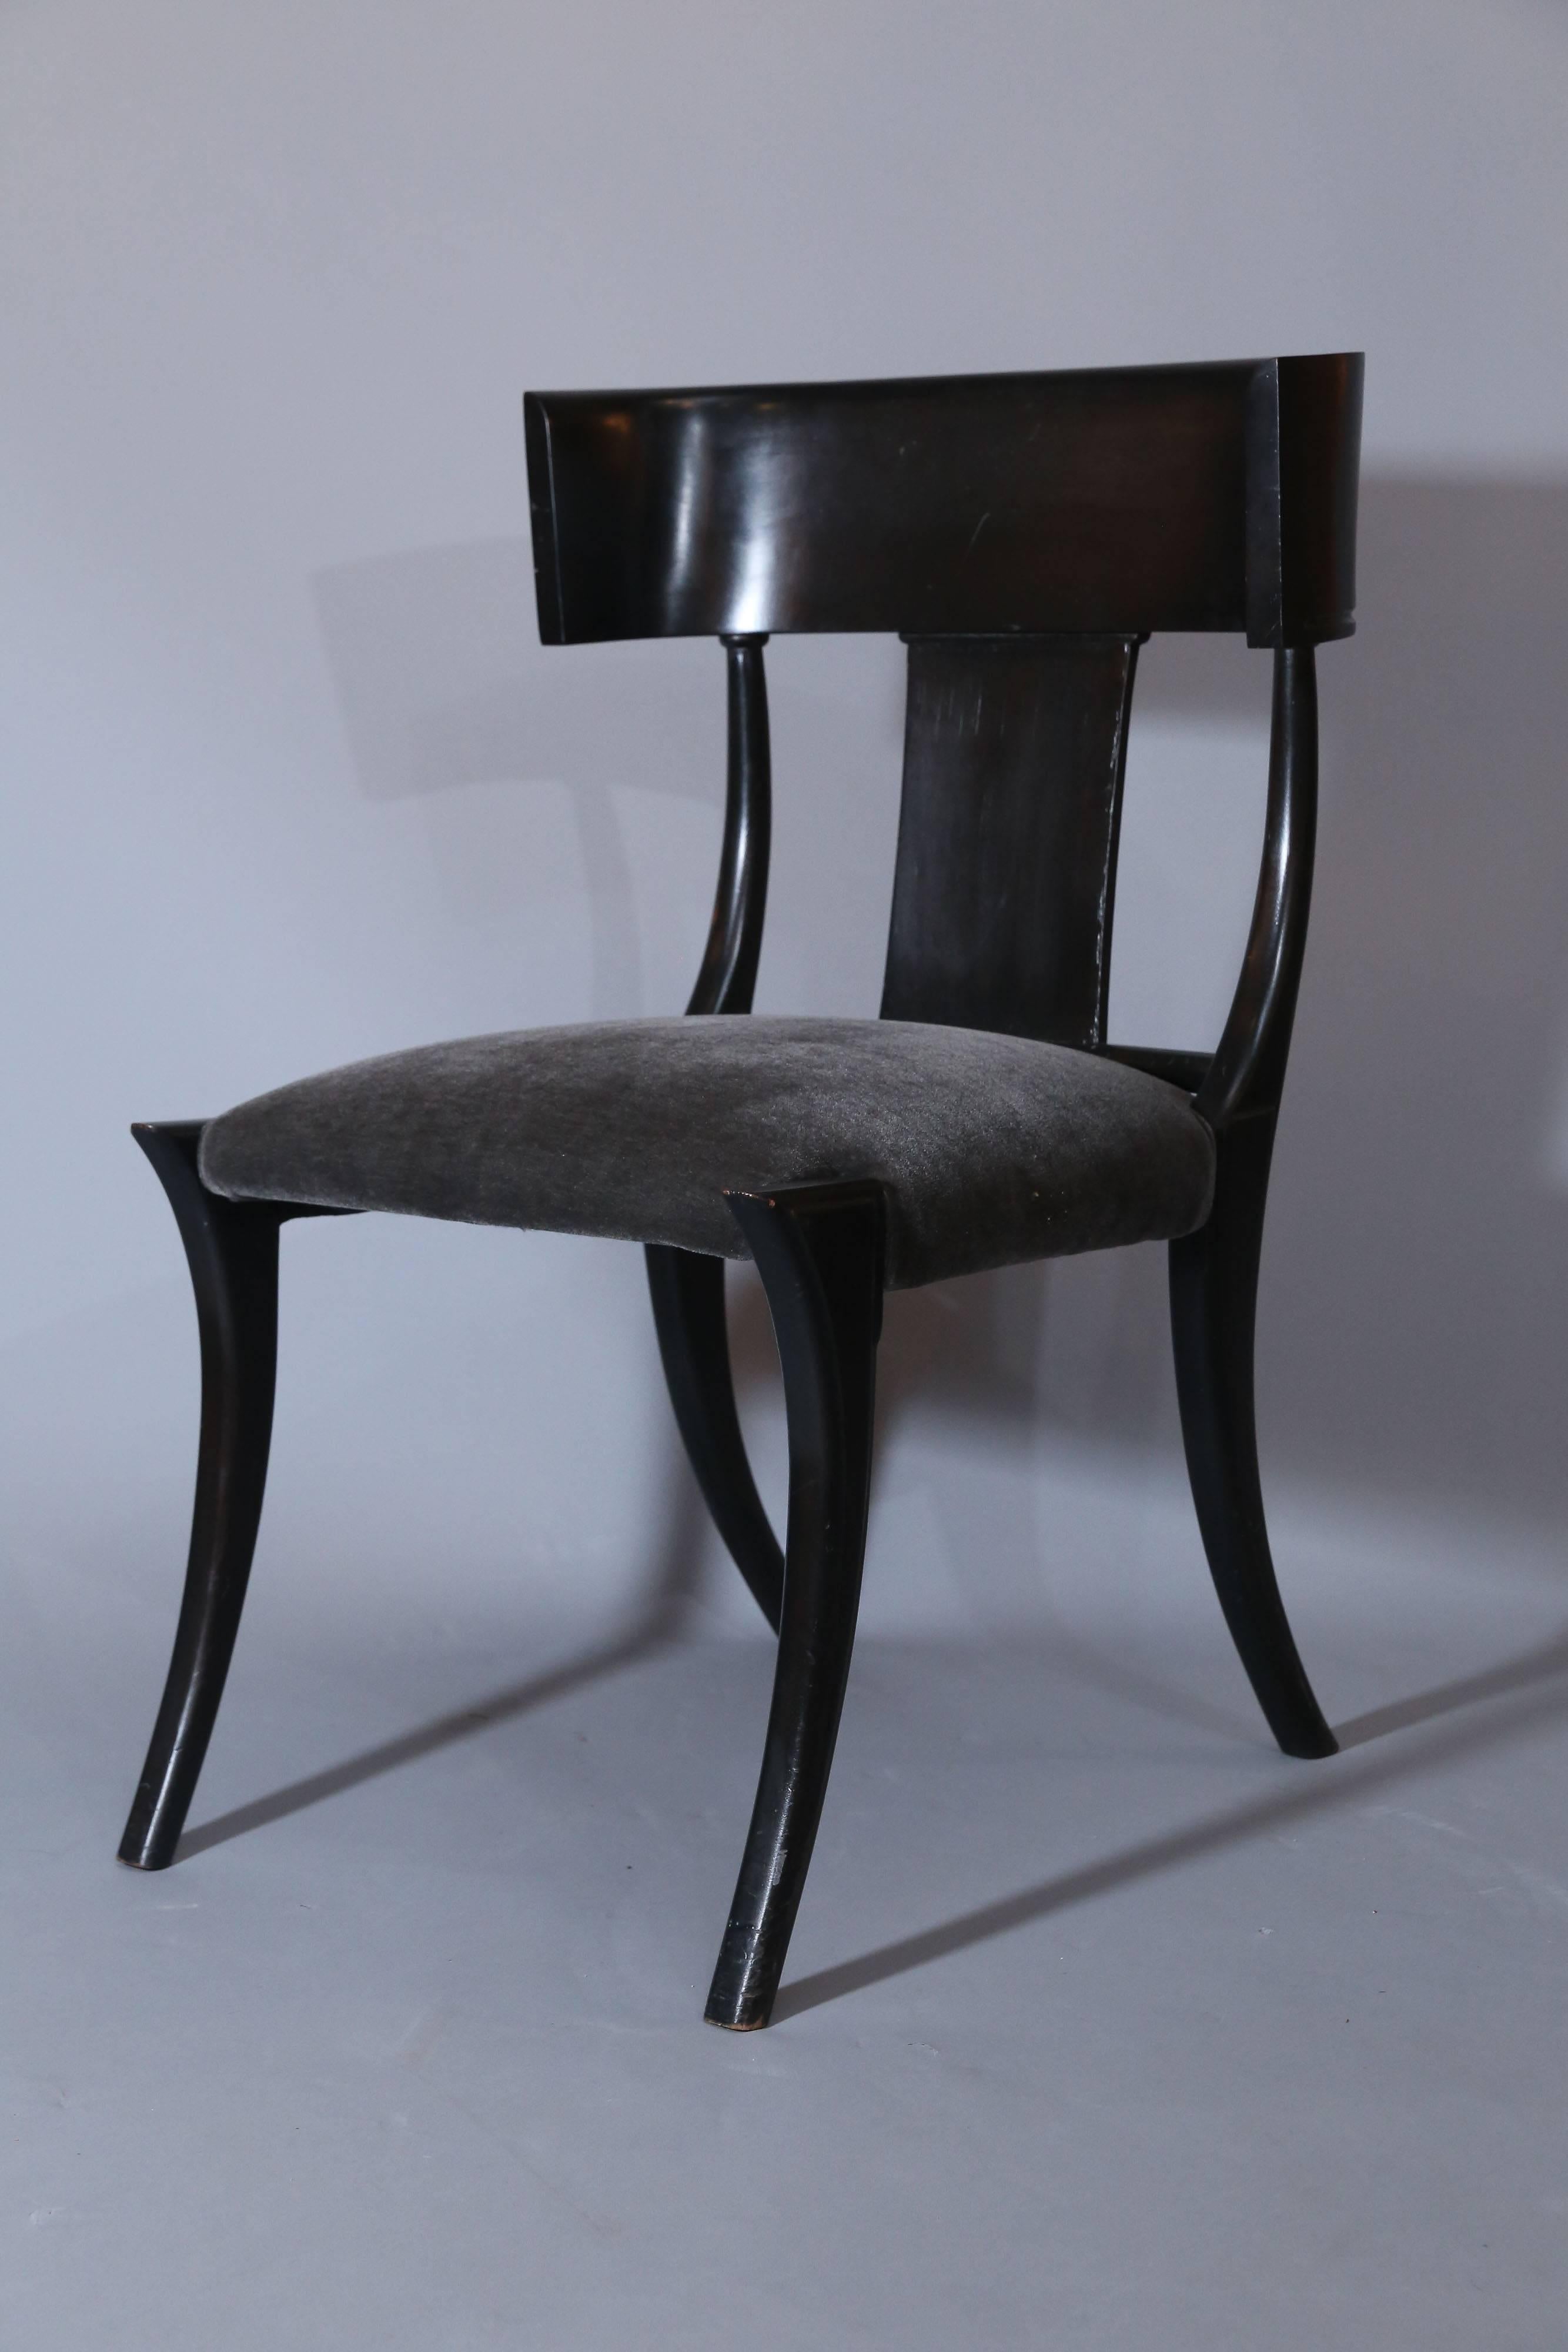 Custom Ebony stained Klismos chairs.

Scale of these chairs is larger than most, as the seats are quite wide.

Seats are upholstered in a dark grey mohair.